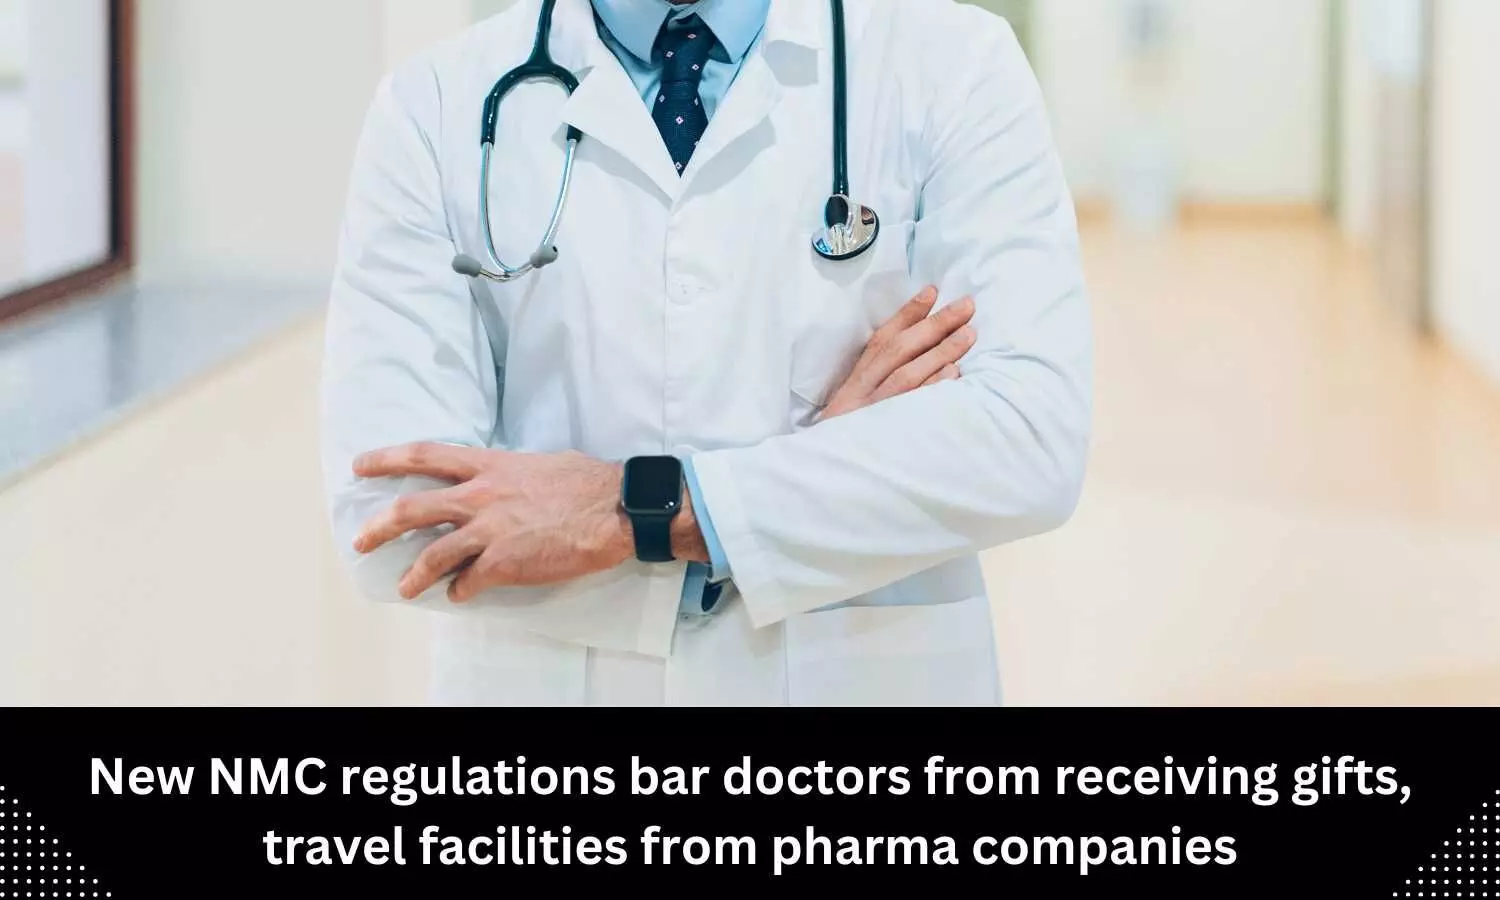 New NMC regulations bar doctors from receiving gifts, travel facilities from pharma companies